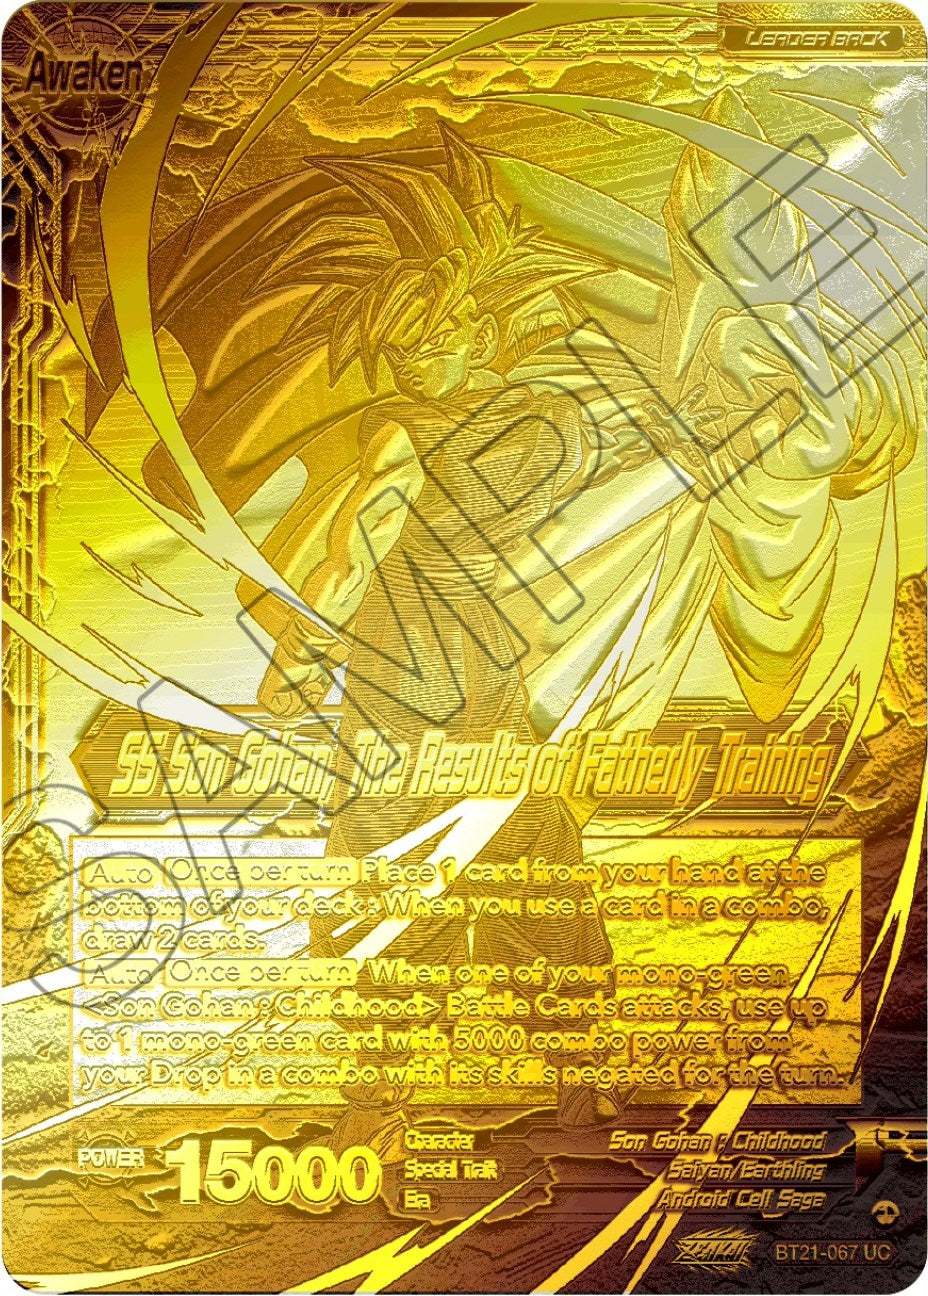 Son Gohan // SS Son Gohan, The Results of Fatherly Training (2023 Championship Finals) (Gold Metal Foil) (BT21-067) [Tournament Promotion Cards] | Event Horizon Hobbies CA